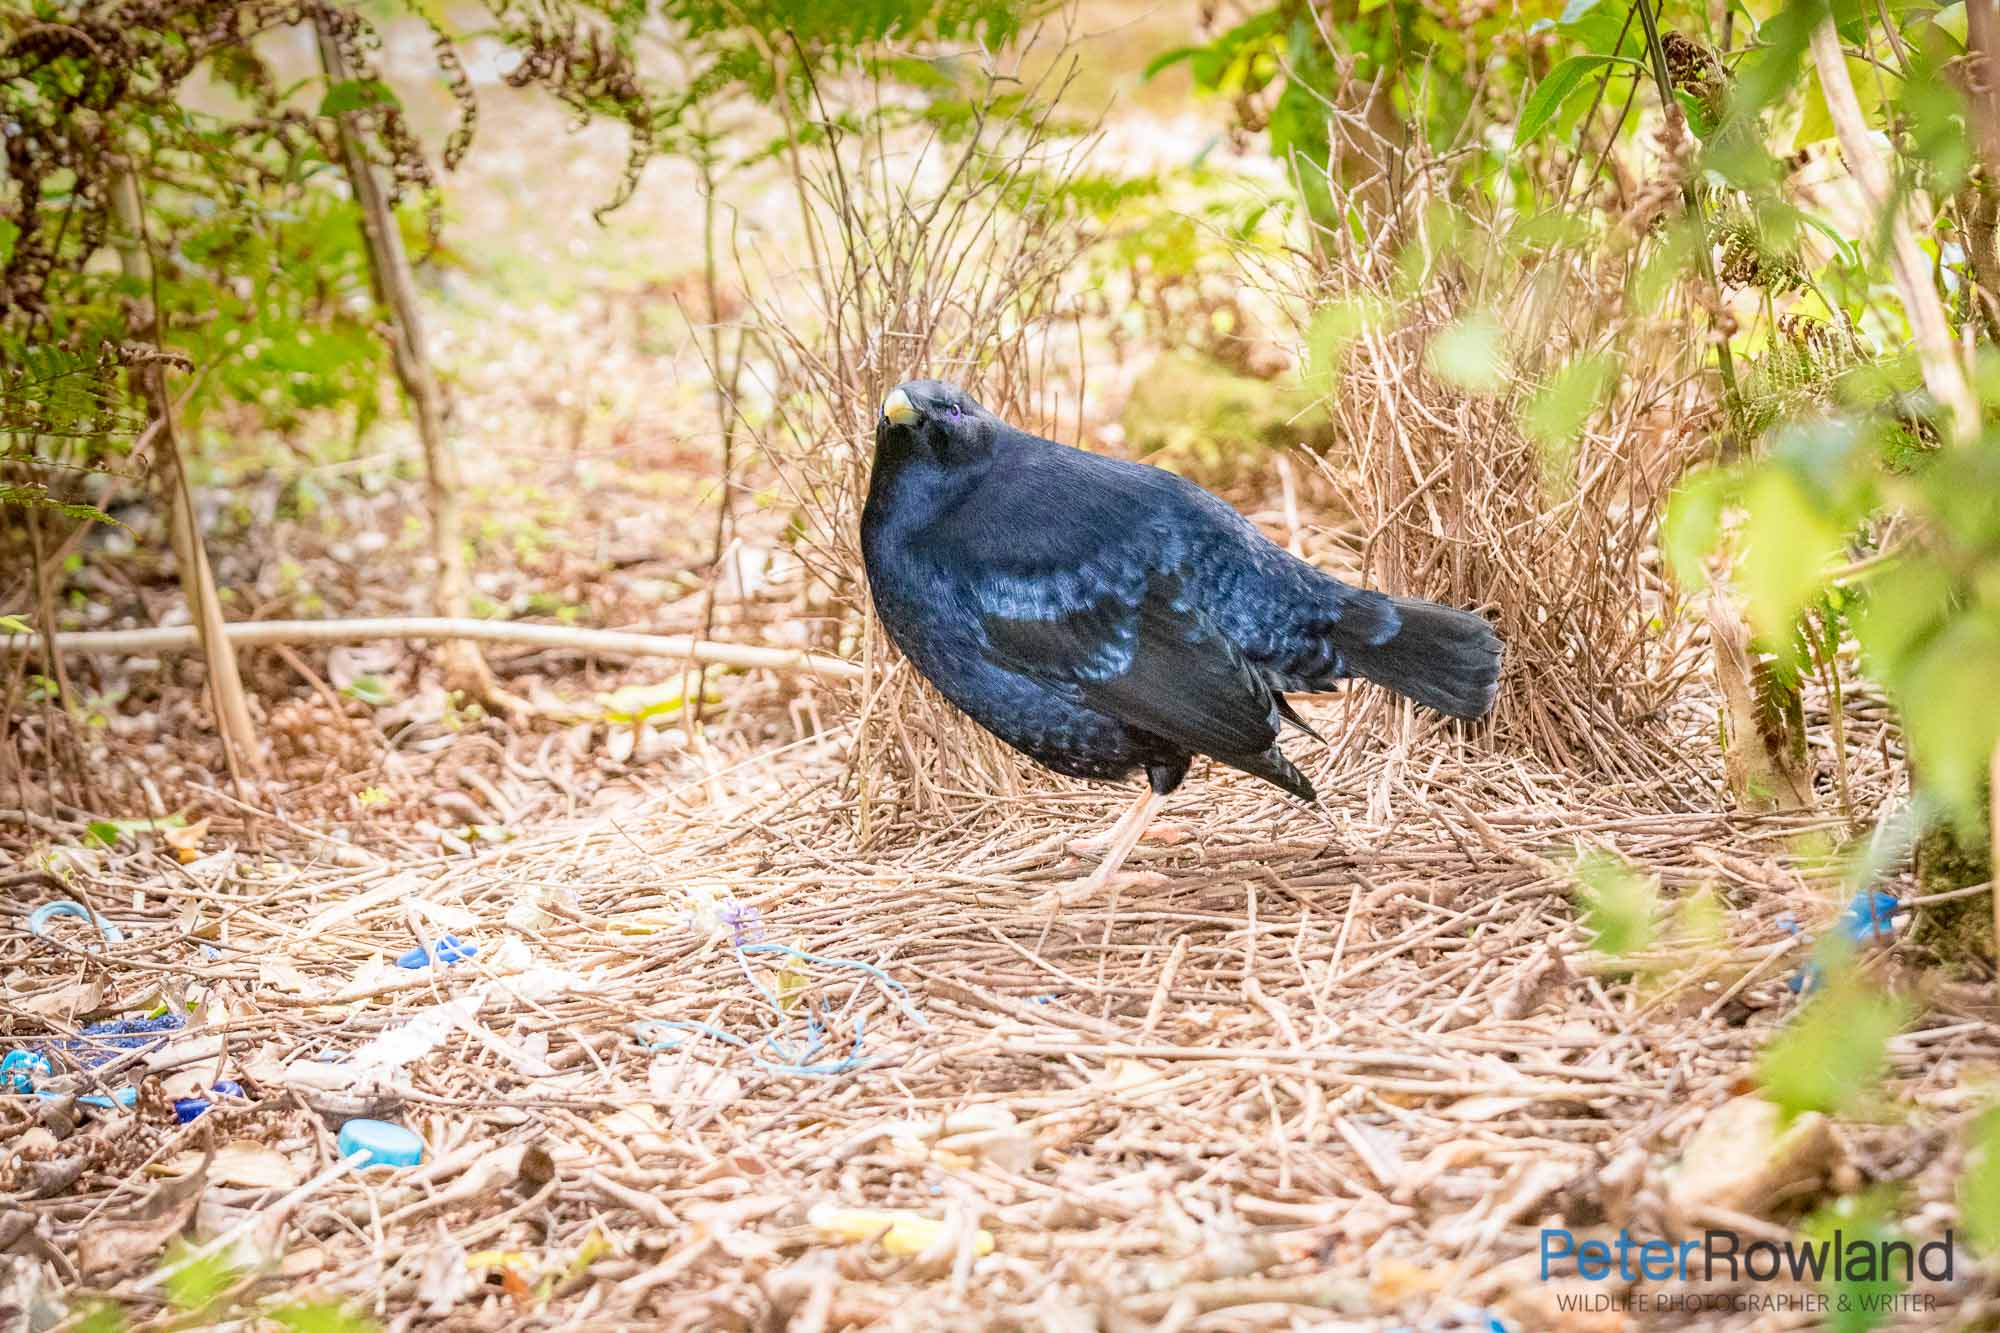 A Satin Bowerbird in it's Bower with assorted blue decorations